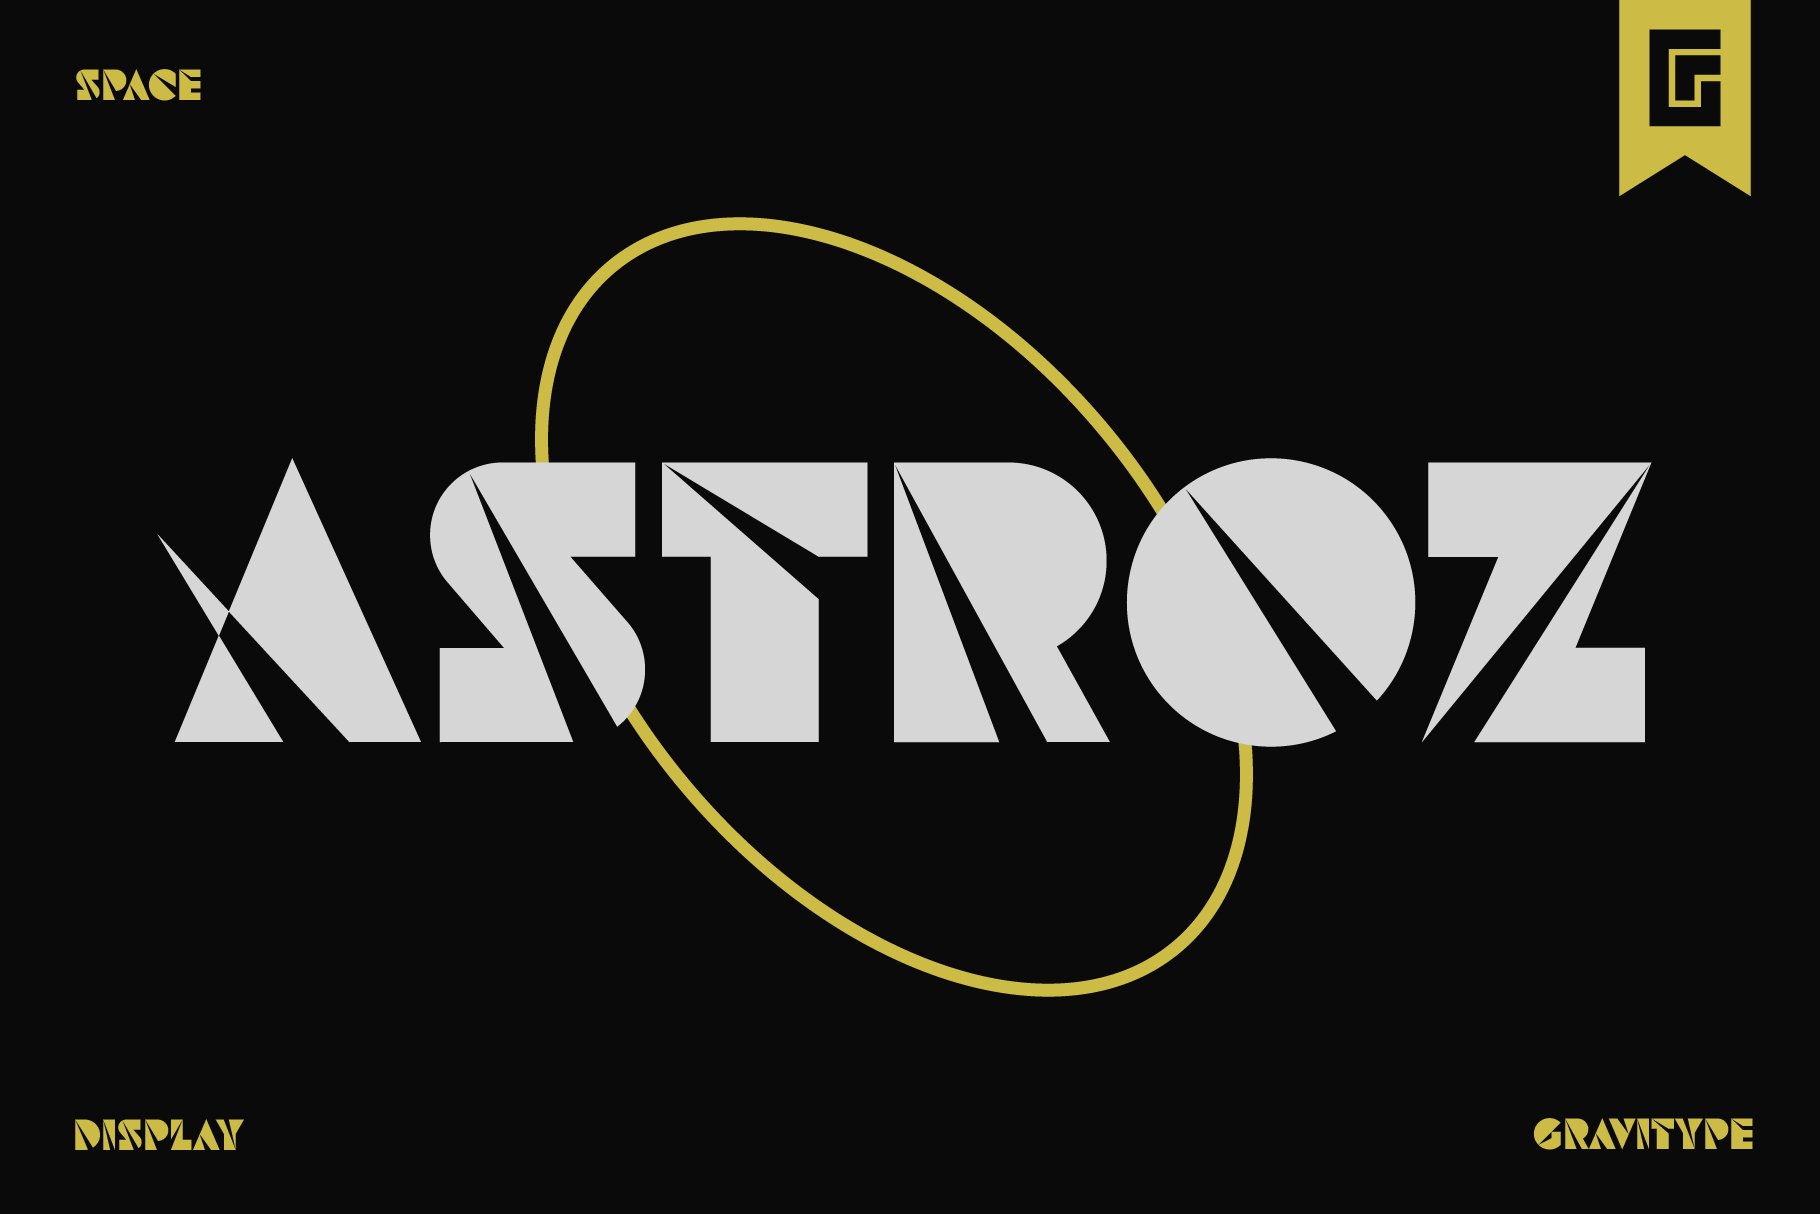 Astroz cover image.